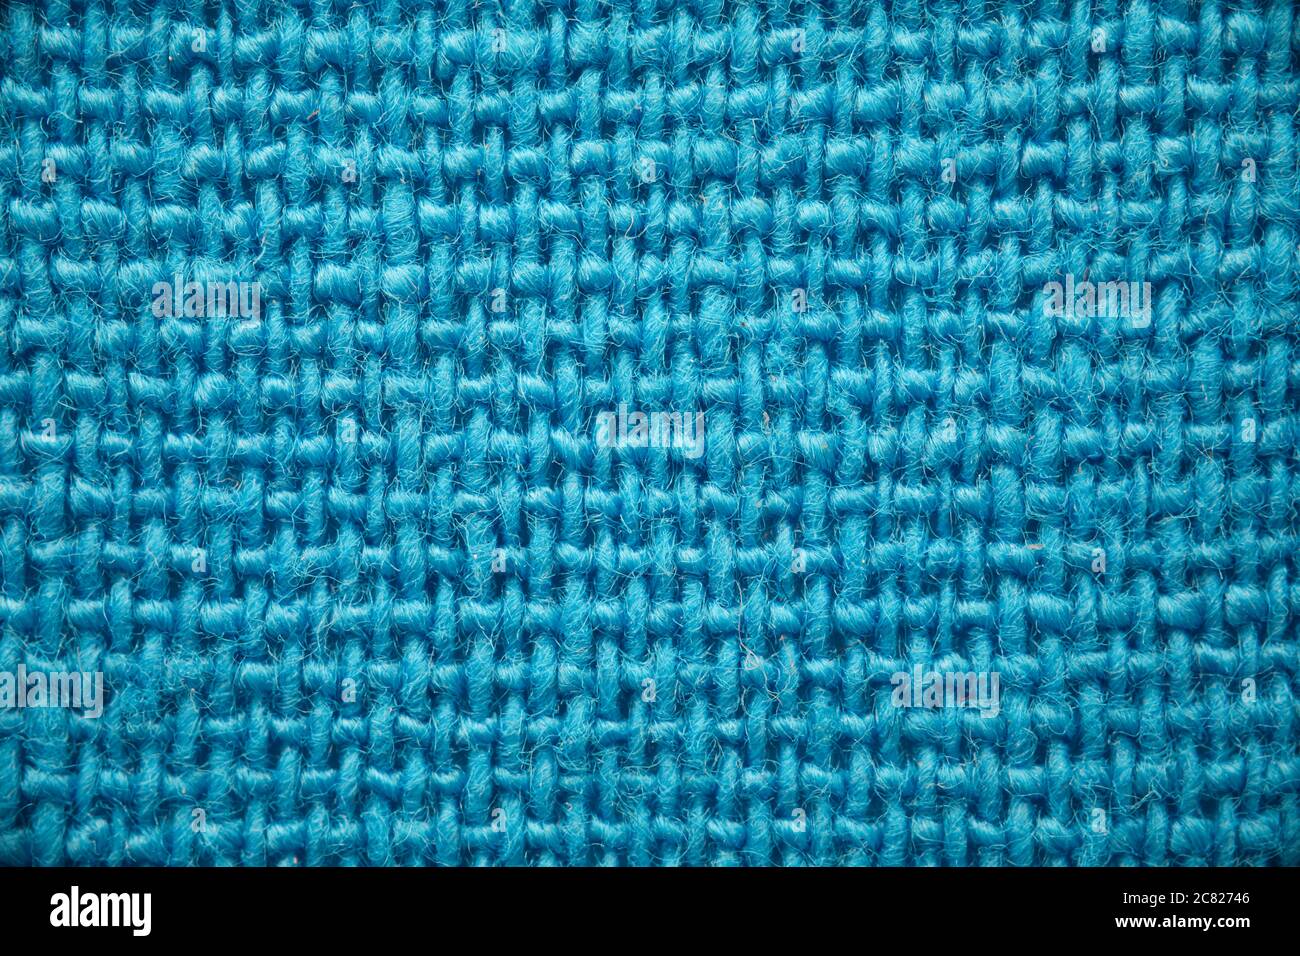 Close-up of knitted seamless background of blue Stock Photo